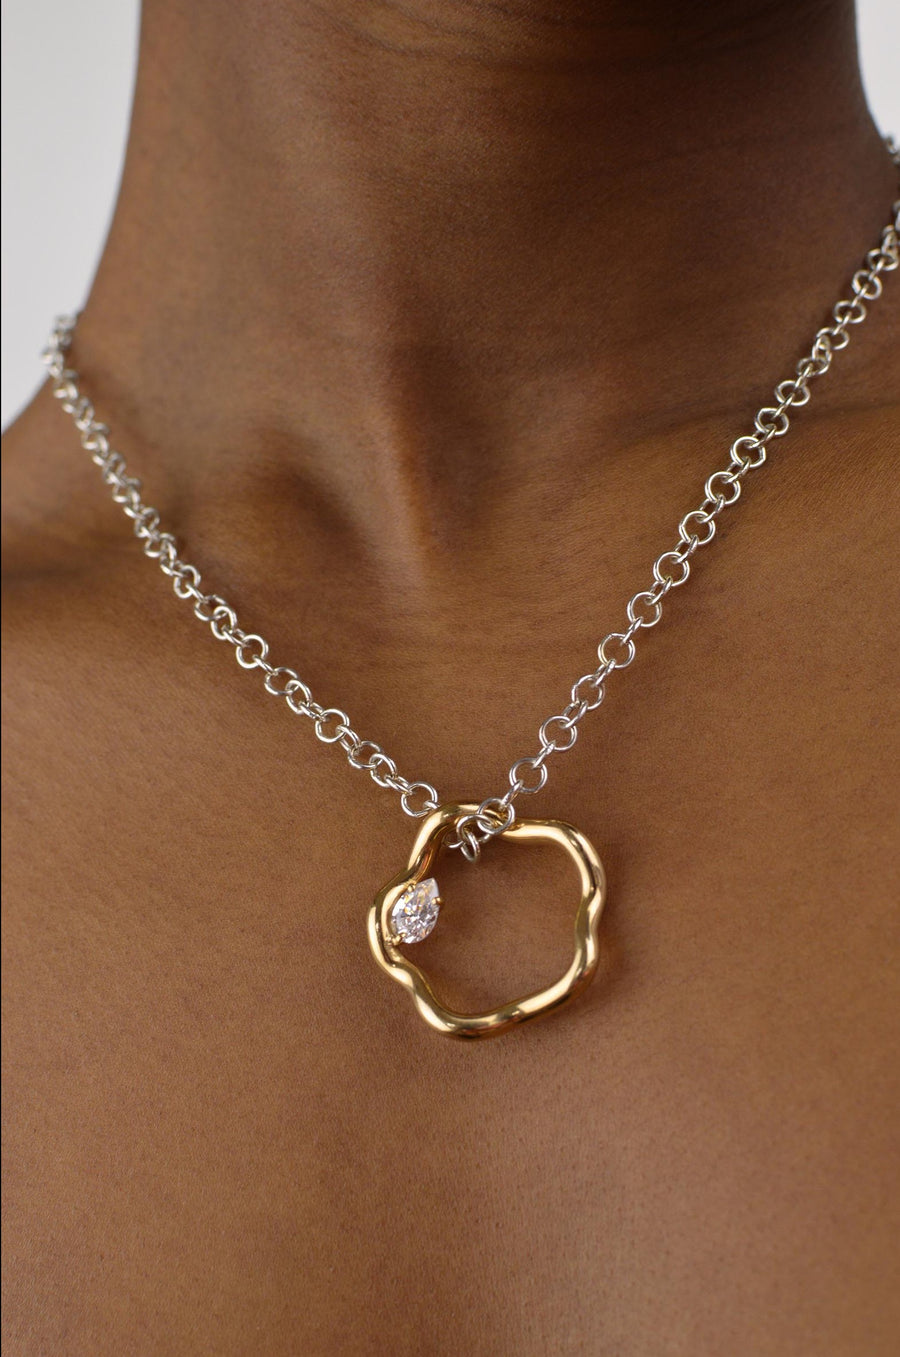 Nayestones Petite Comete Silver Necklace with silver chain and gold plated pendant, with white pear cut stone - made in Antwerp